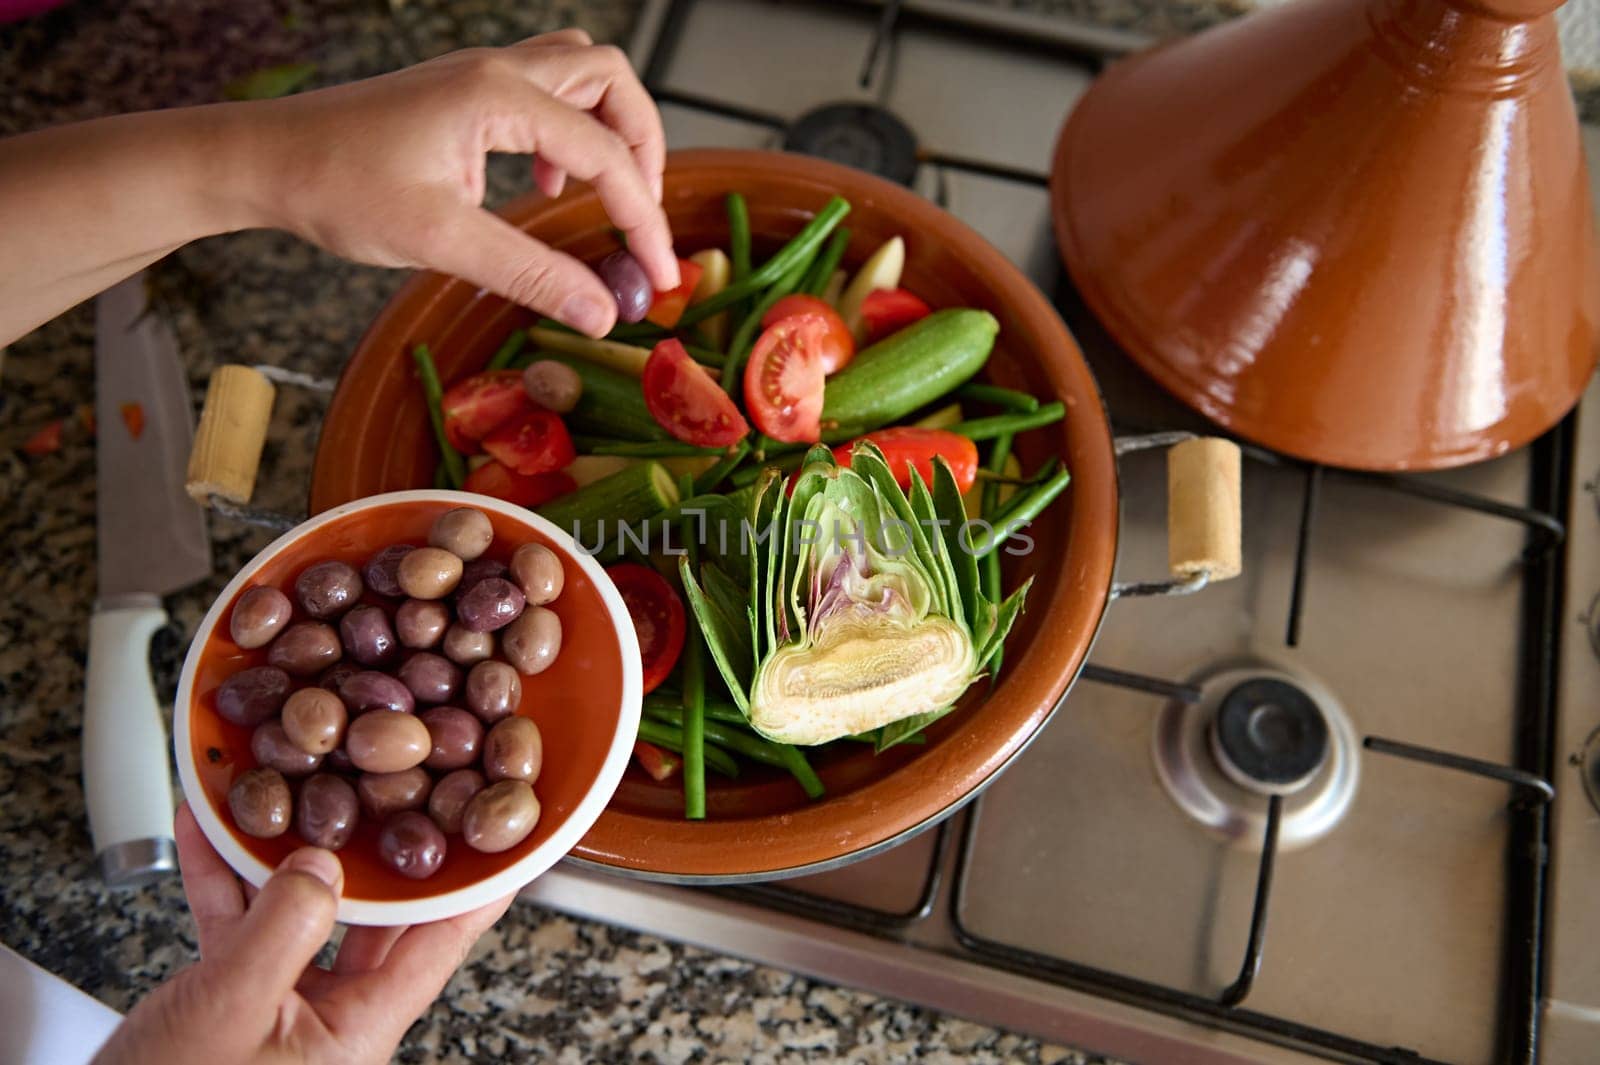 View from above of housewife adding olives into a meal while cooking healthy vegetarian meal in tagine. The concept of traditional Moroccan cuisine